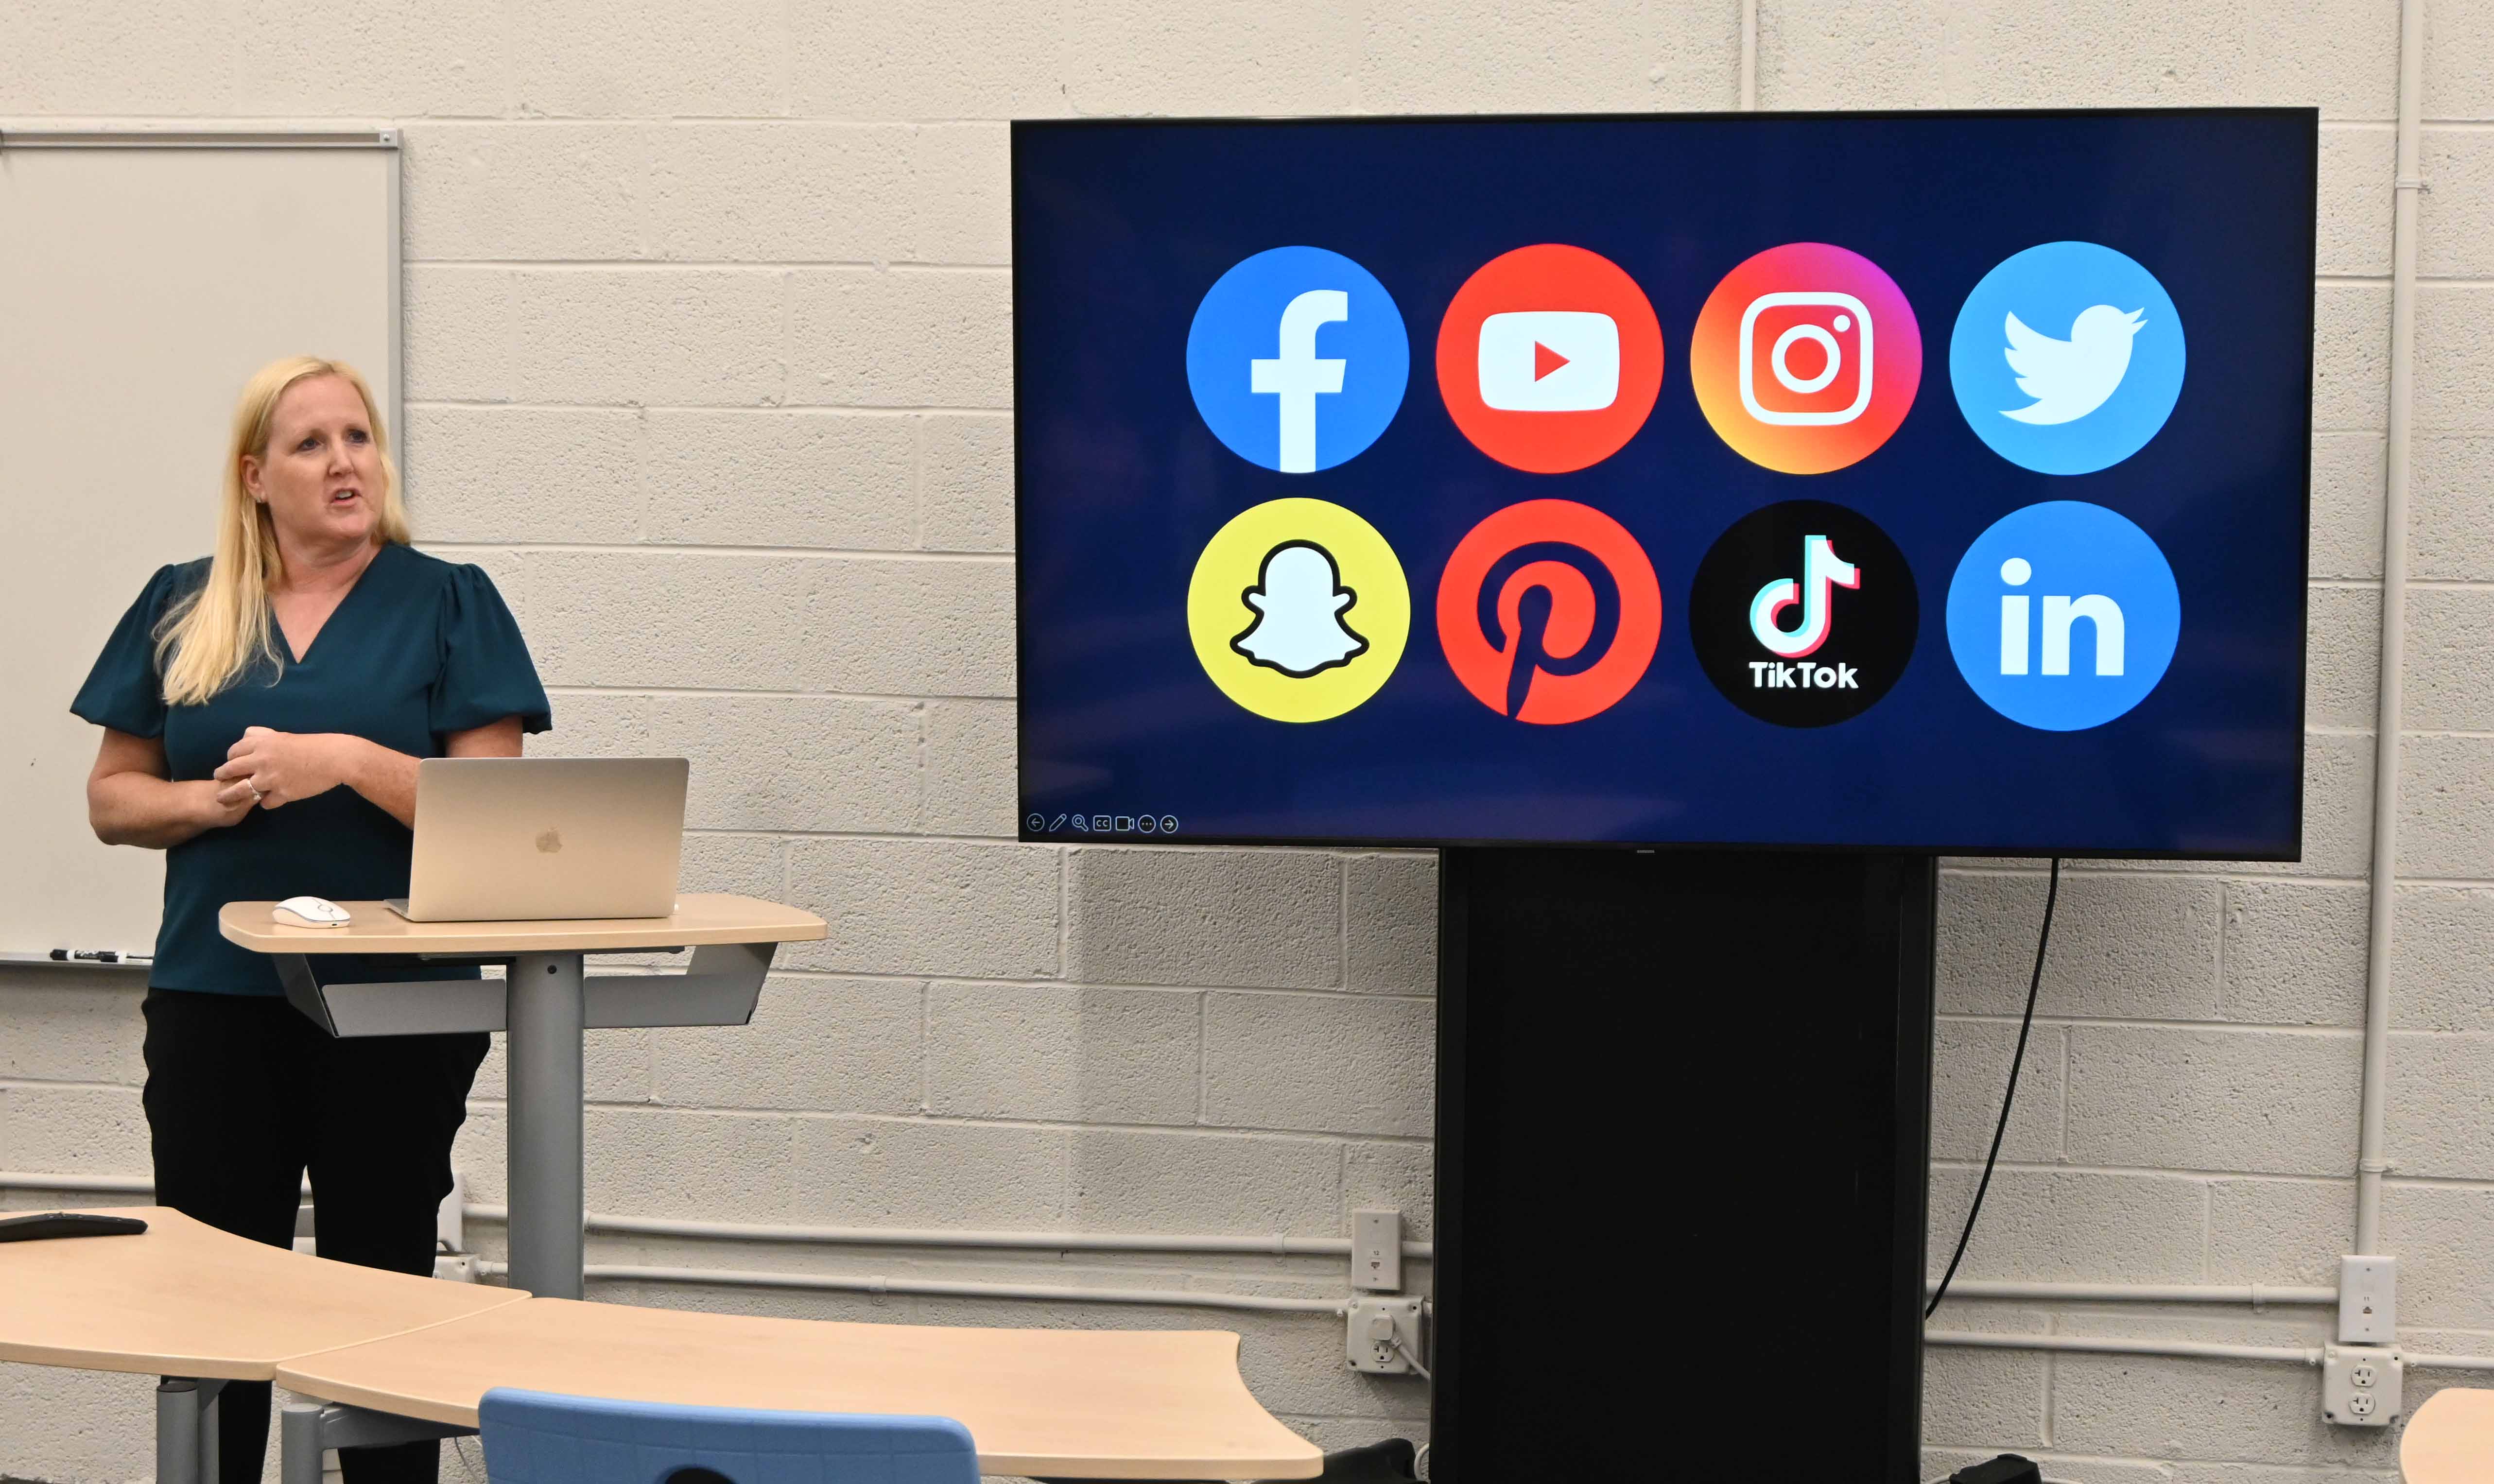 Local business owners get crash course on marketing and social media – Salisbury Post